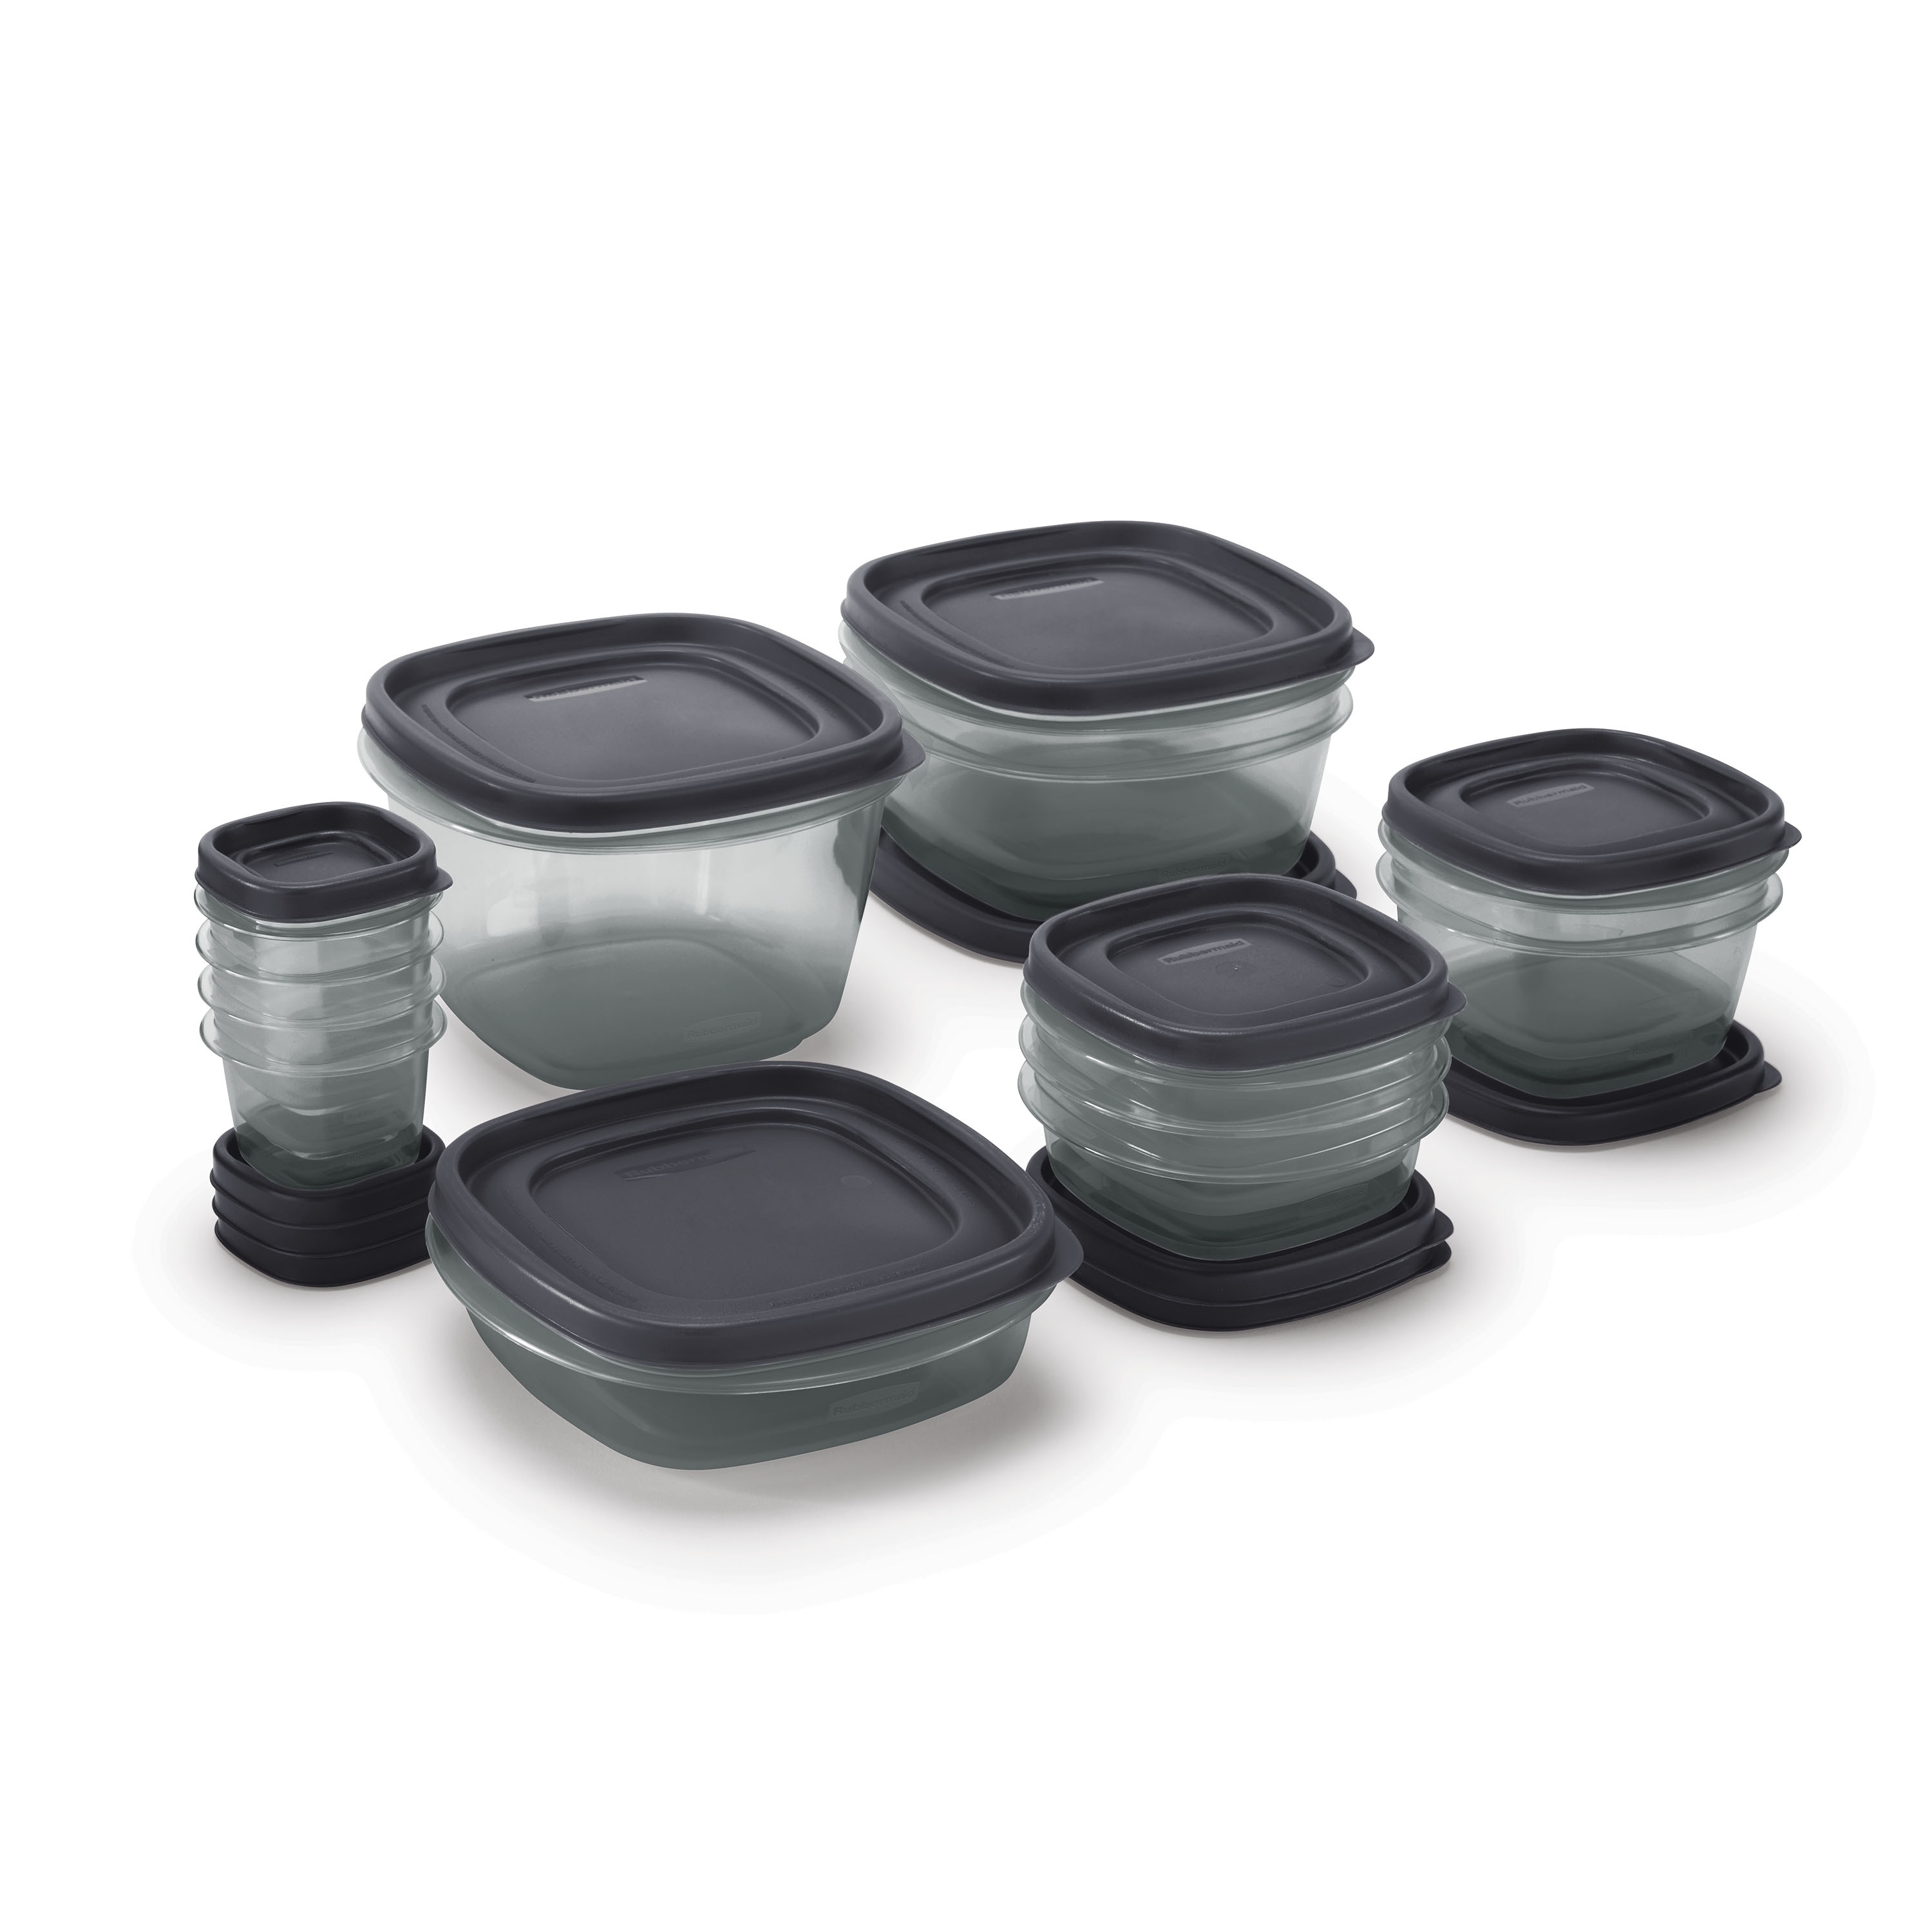 Rubbermaid 24-Piece Food Storage Set with Easy Find Lids, Clear